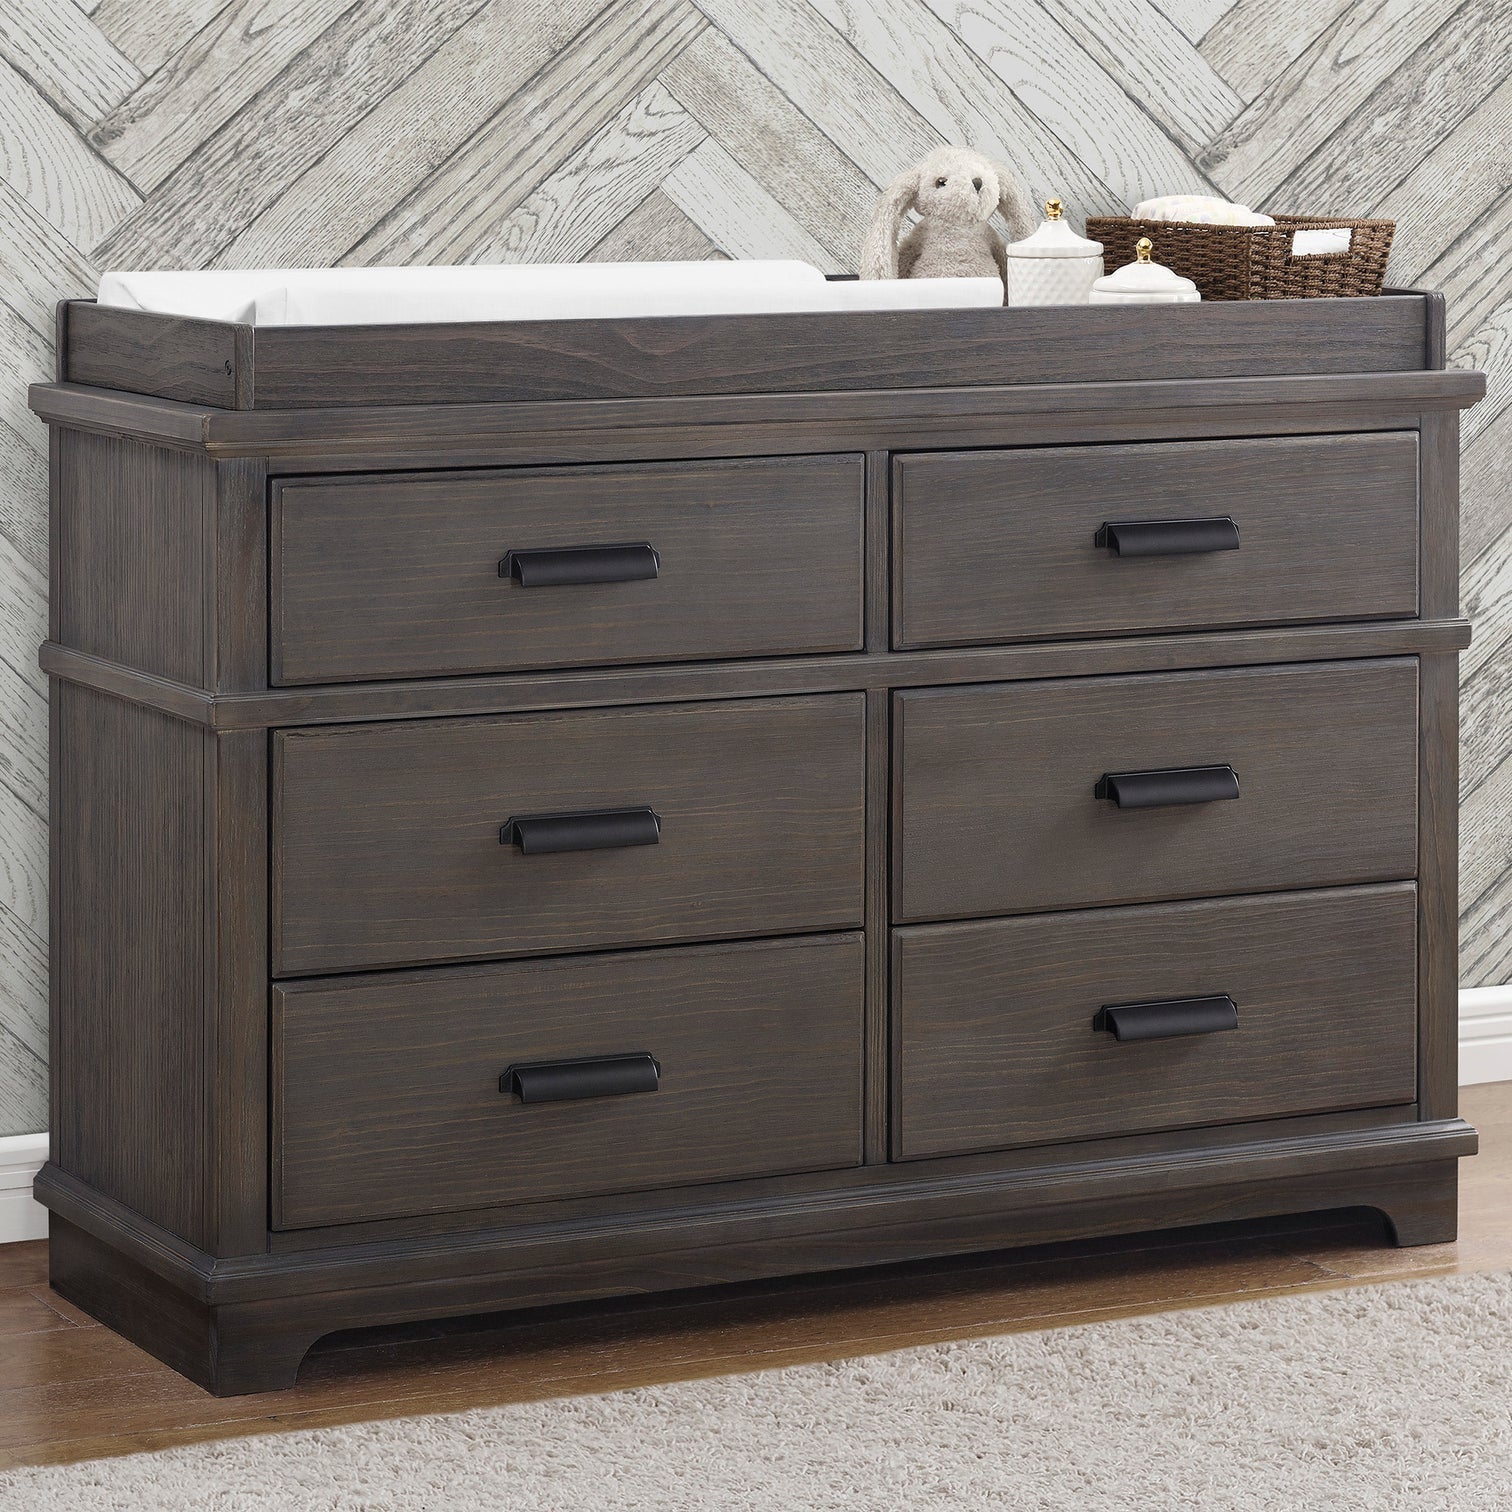 Simmons Kids Asher 6 Drawer Dresser with Change Top Tray - Rustic Grey-DELTA-Little Giant Kidz